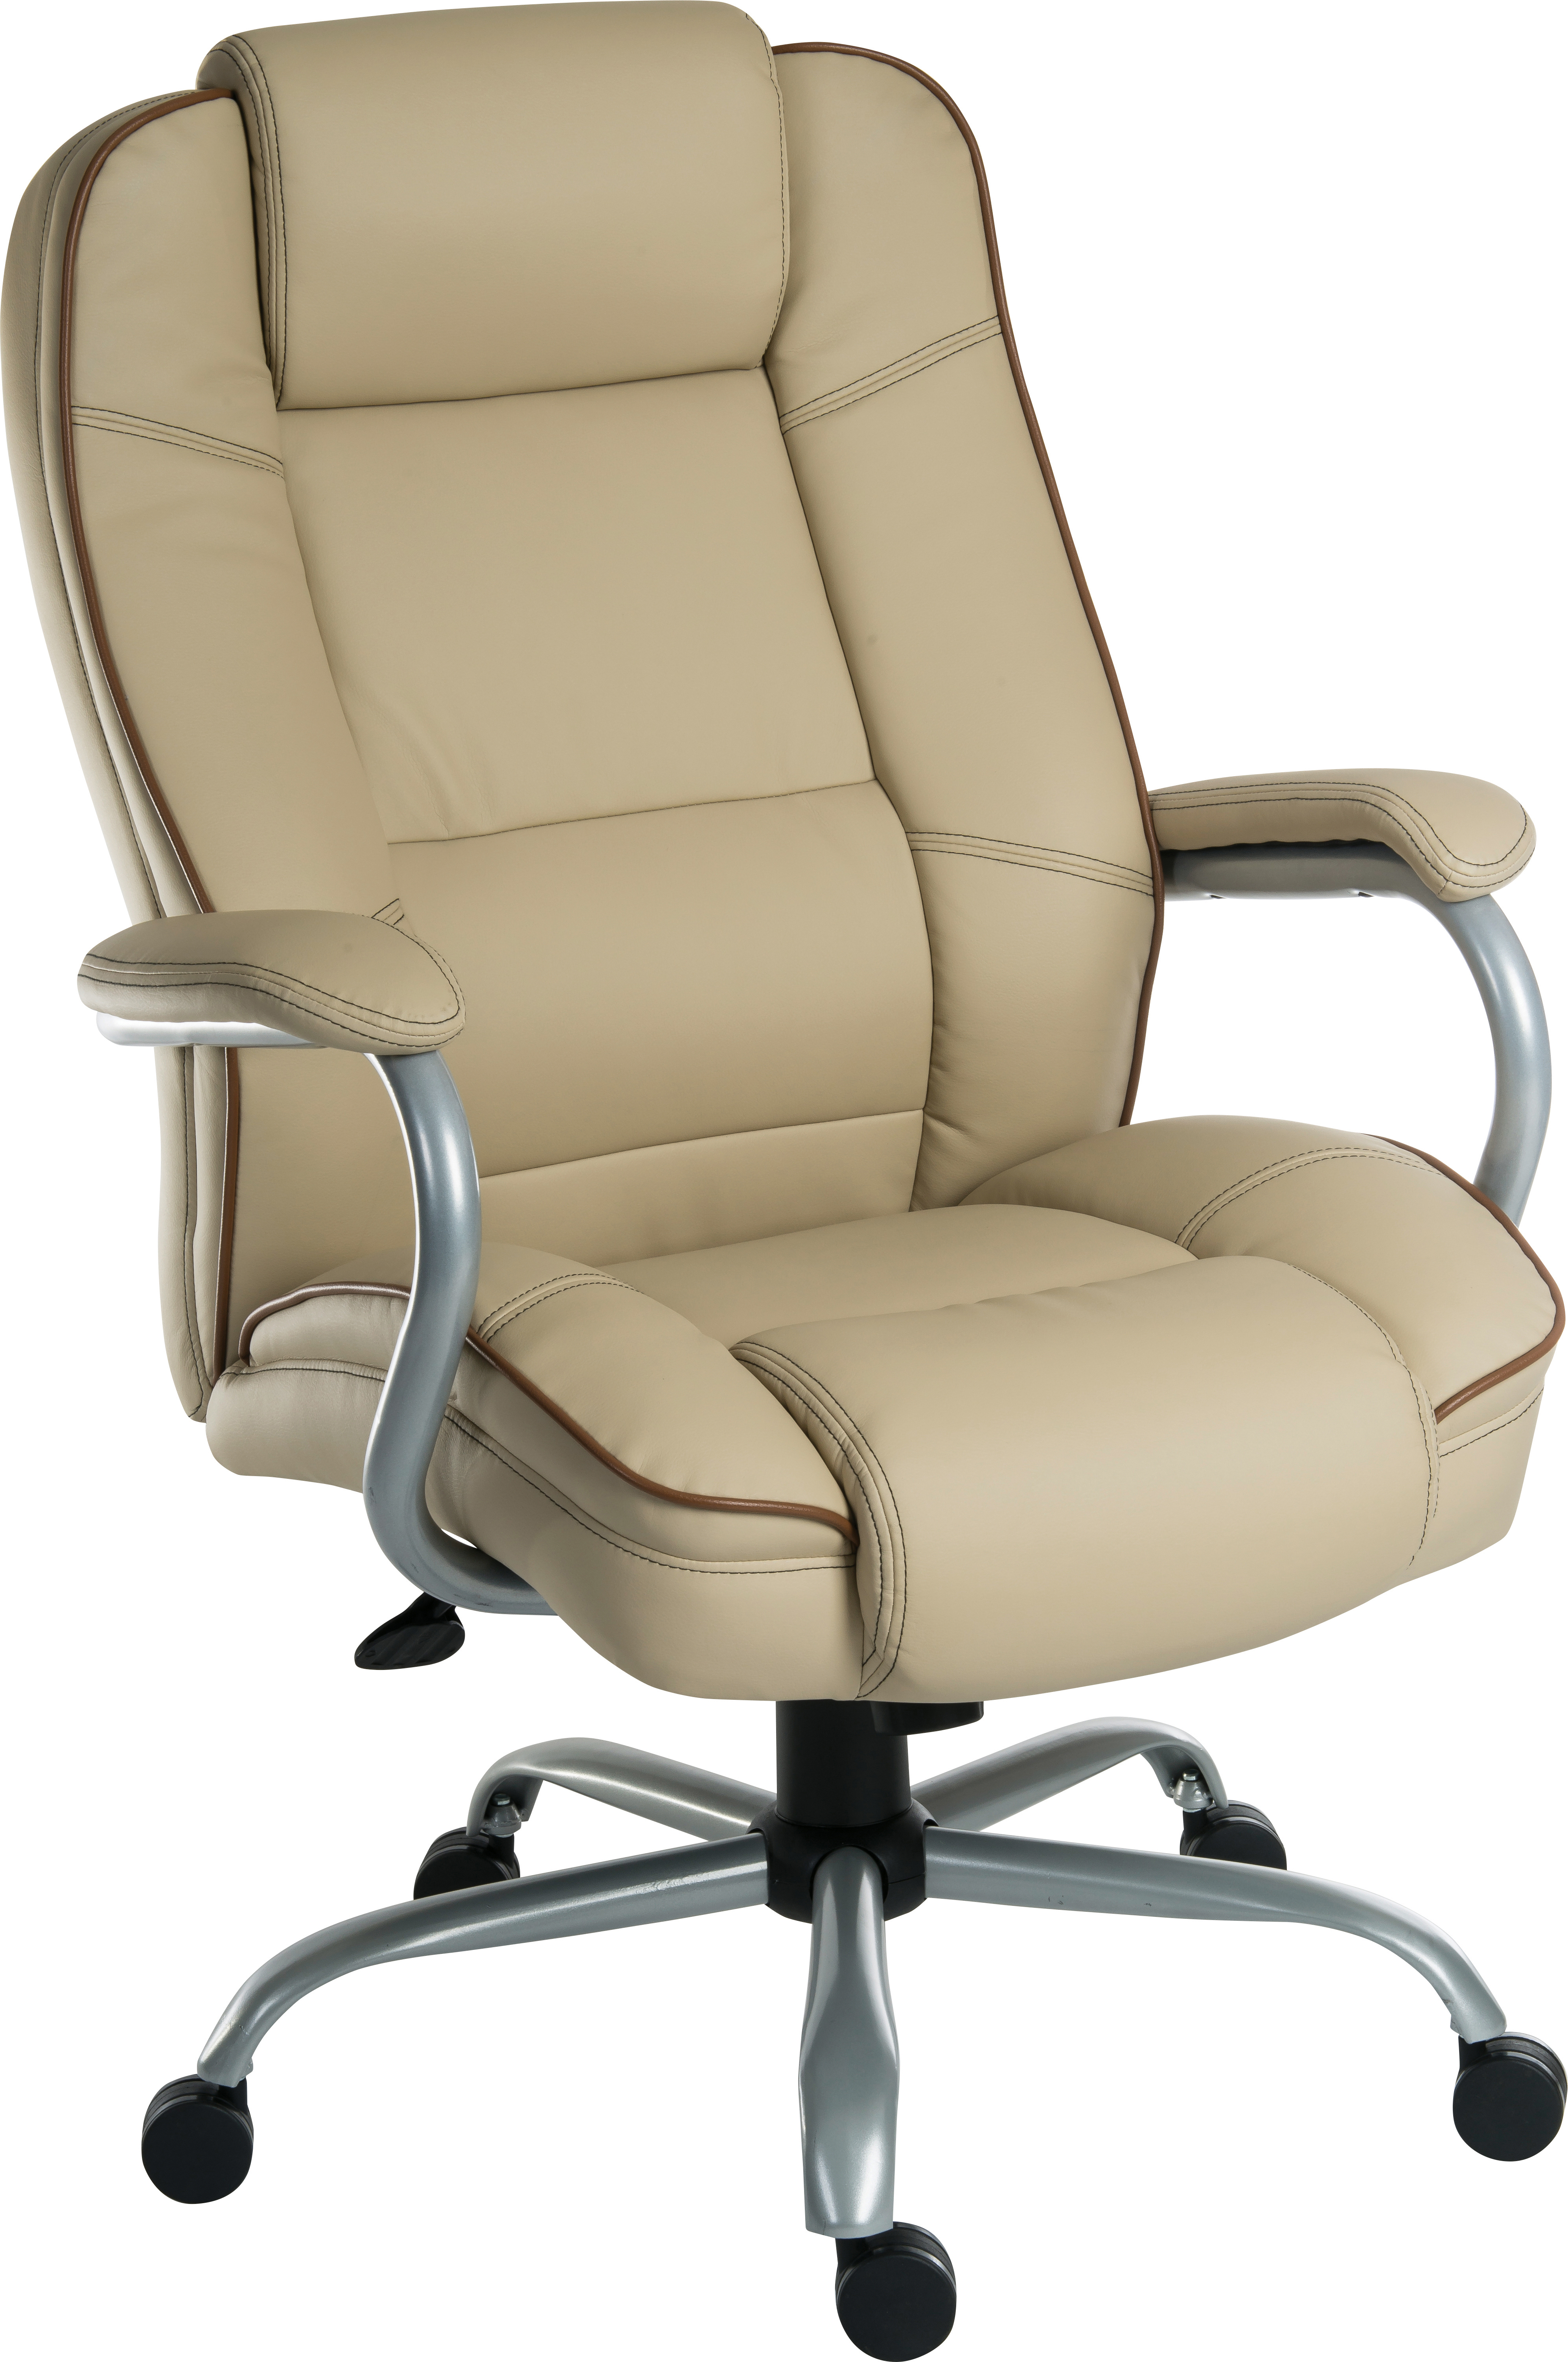 Goliath Duo Heavy Duty Bonded Leather Faced Executive Office Chair Cream - 6925C